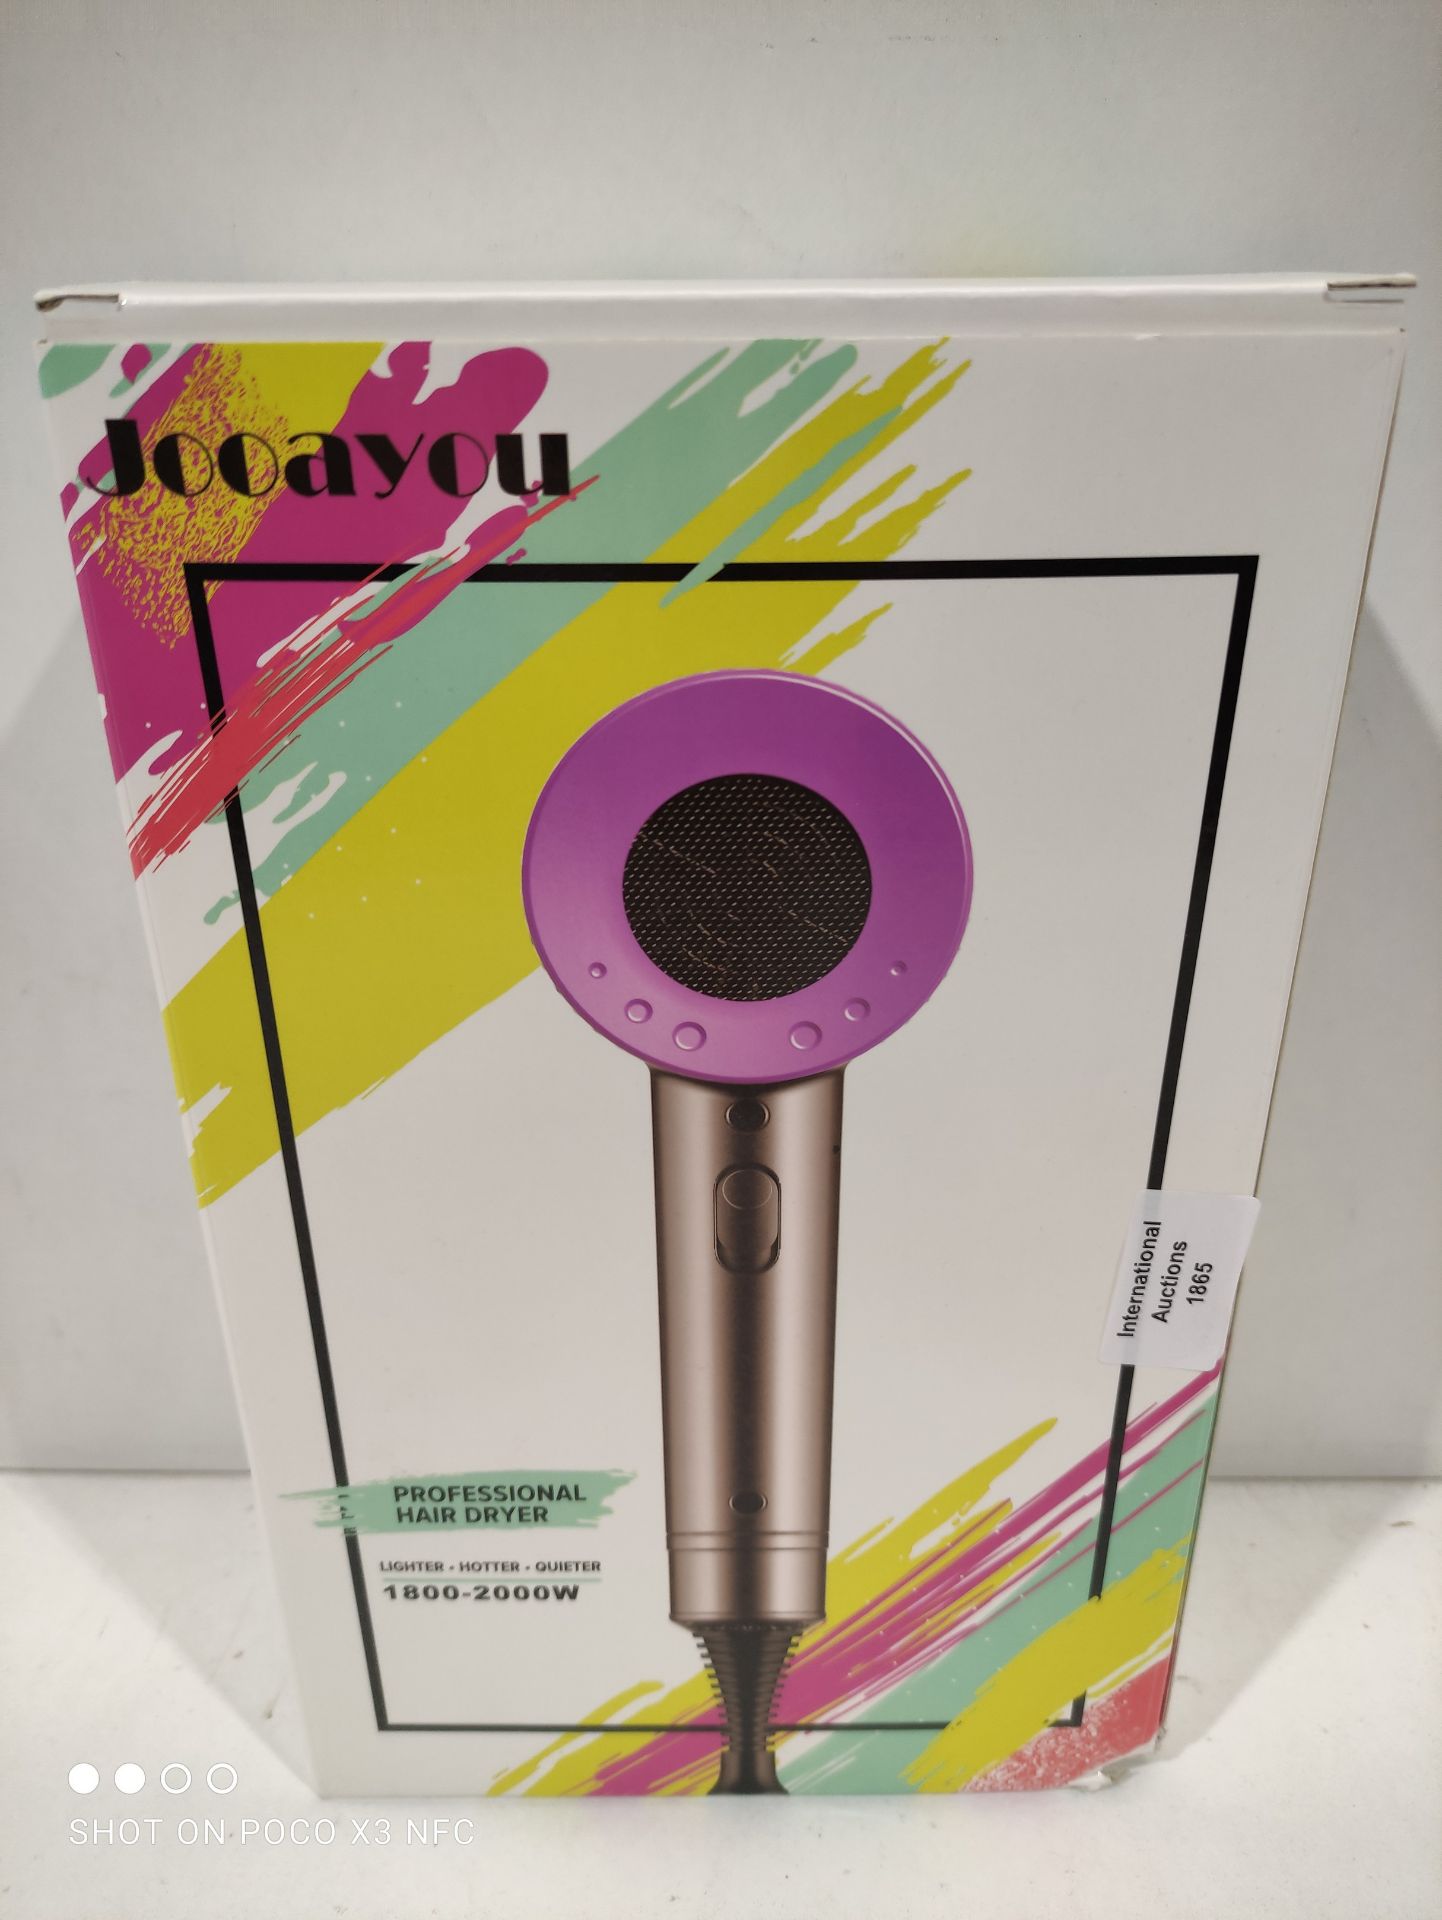 RRP £33.98 Jooayou Professional Hair Dryer 2000W Fast Dry Negative - Image 2 of 2